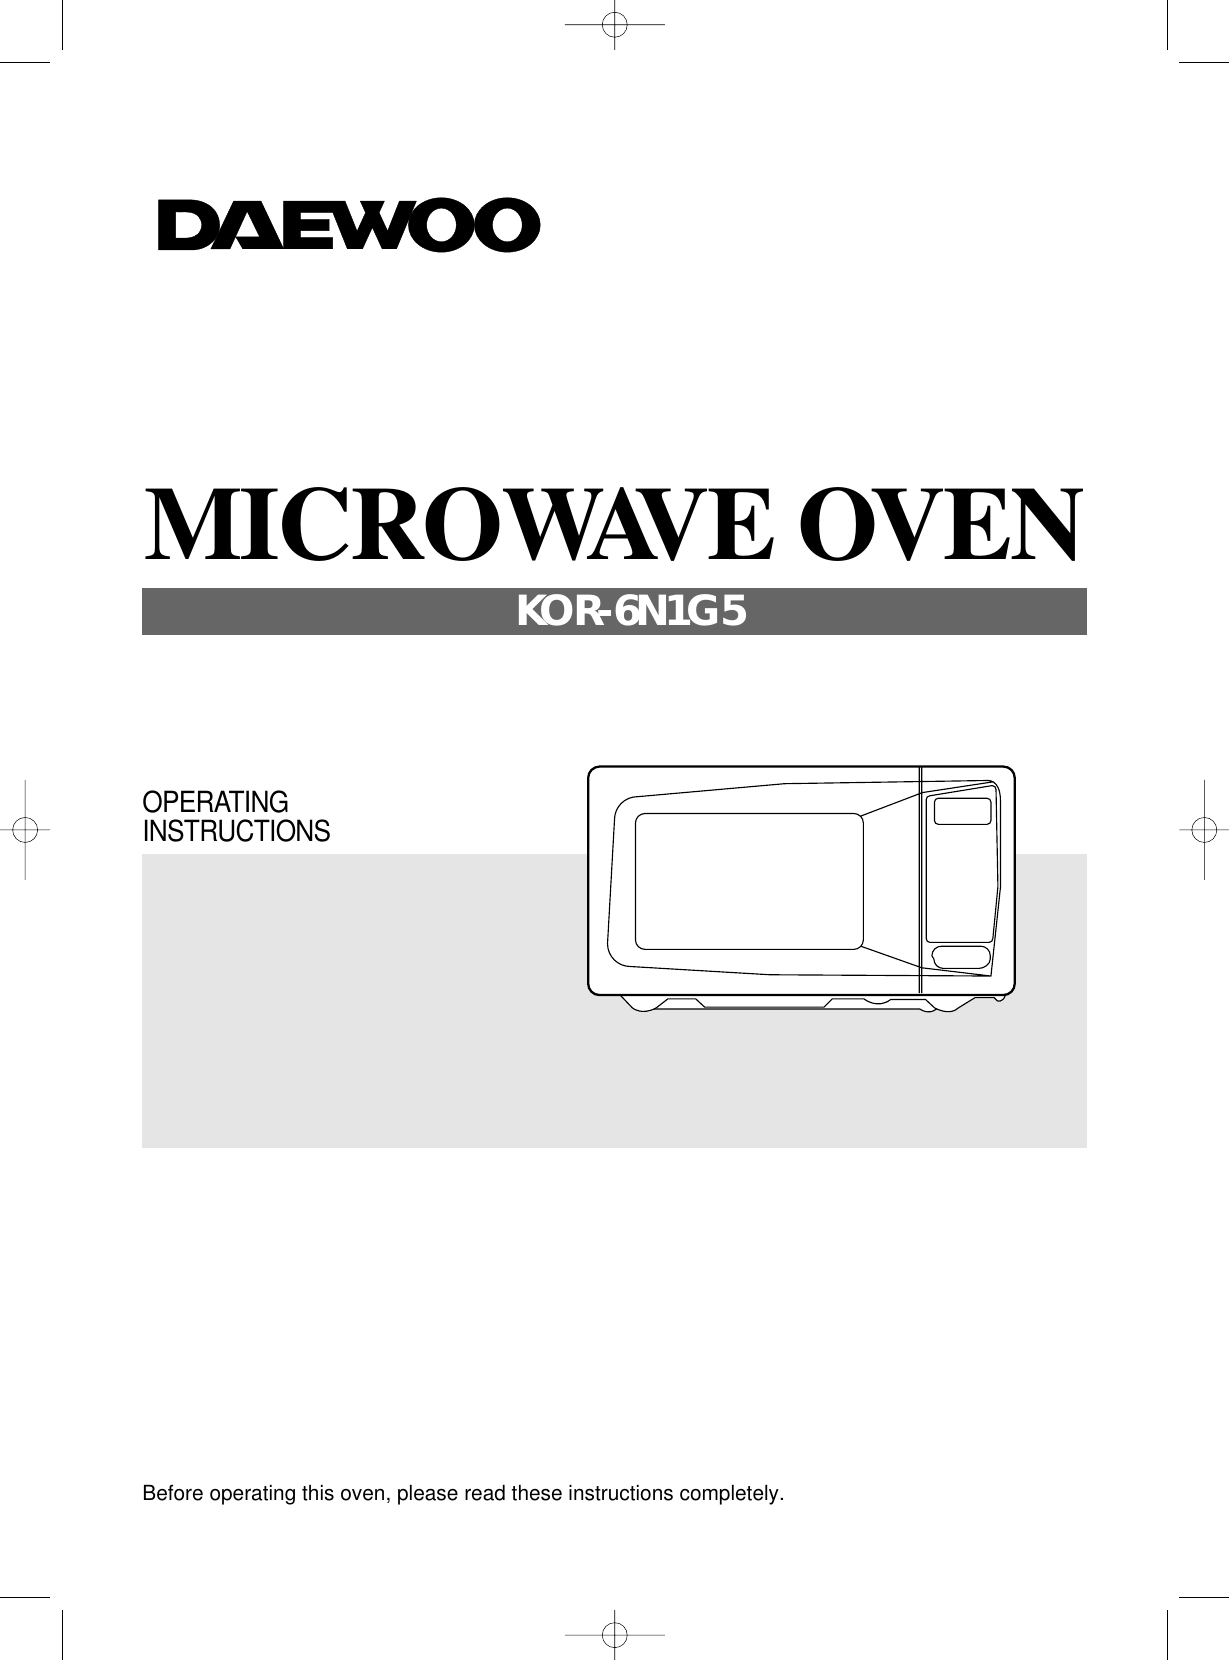 Before operating this oven, please read these instructions completely.OPERATINGINSTRUCTIONSMICROWAVE OVENKOR-6N1G5